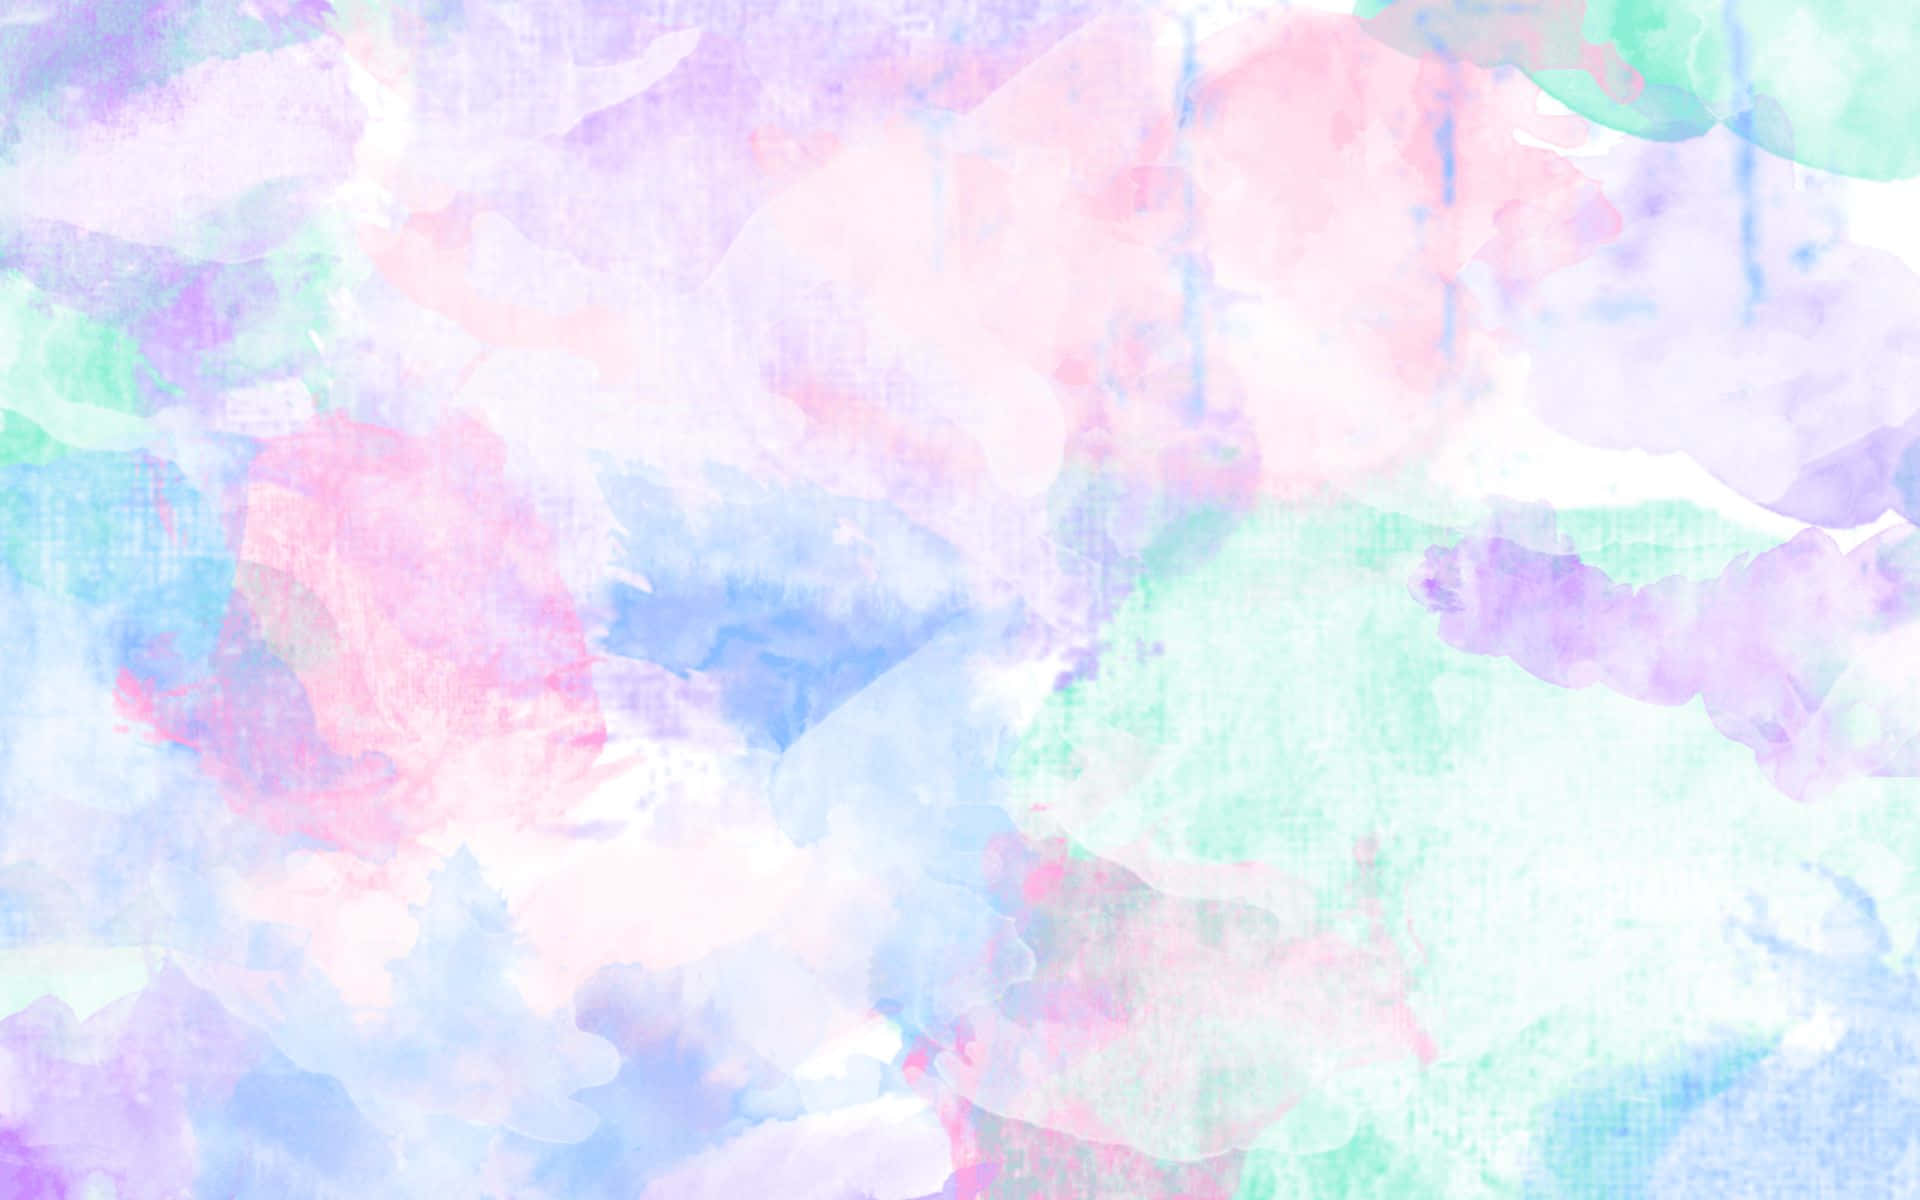 watercolor paint texture by sassy_sassy on spoonflower - custom fabric